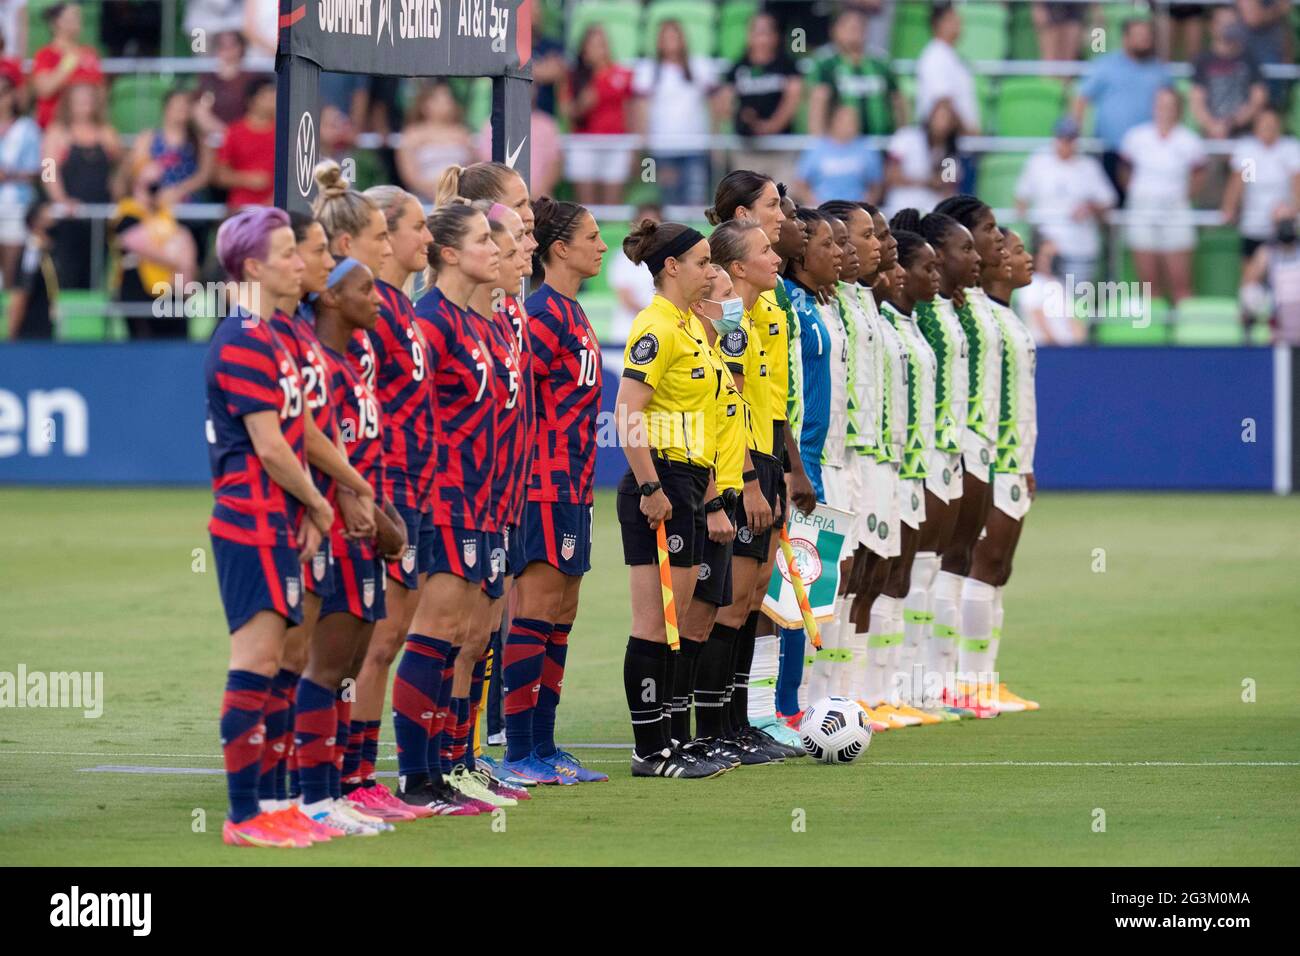 Austin, Texas, USA, June 16 2021: The USA and Nigerian teams line up for introductions before the US Women's National Team (USWNT) beats Nigeria, 2-0 in the inaugural match of Austin's new Q2 Stadium. The U.S. women's team, an Olympic favorite, is wrapping up a series of summer matches to prep for the Tokyo Games. Credit: Bob Daemmrich/Alamy Live News Stock Photo